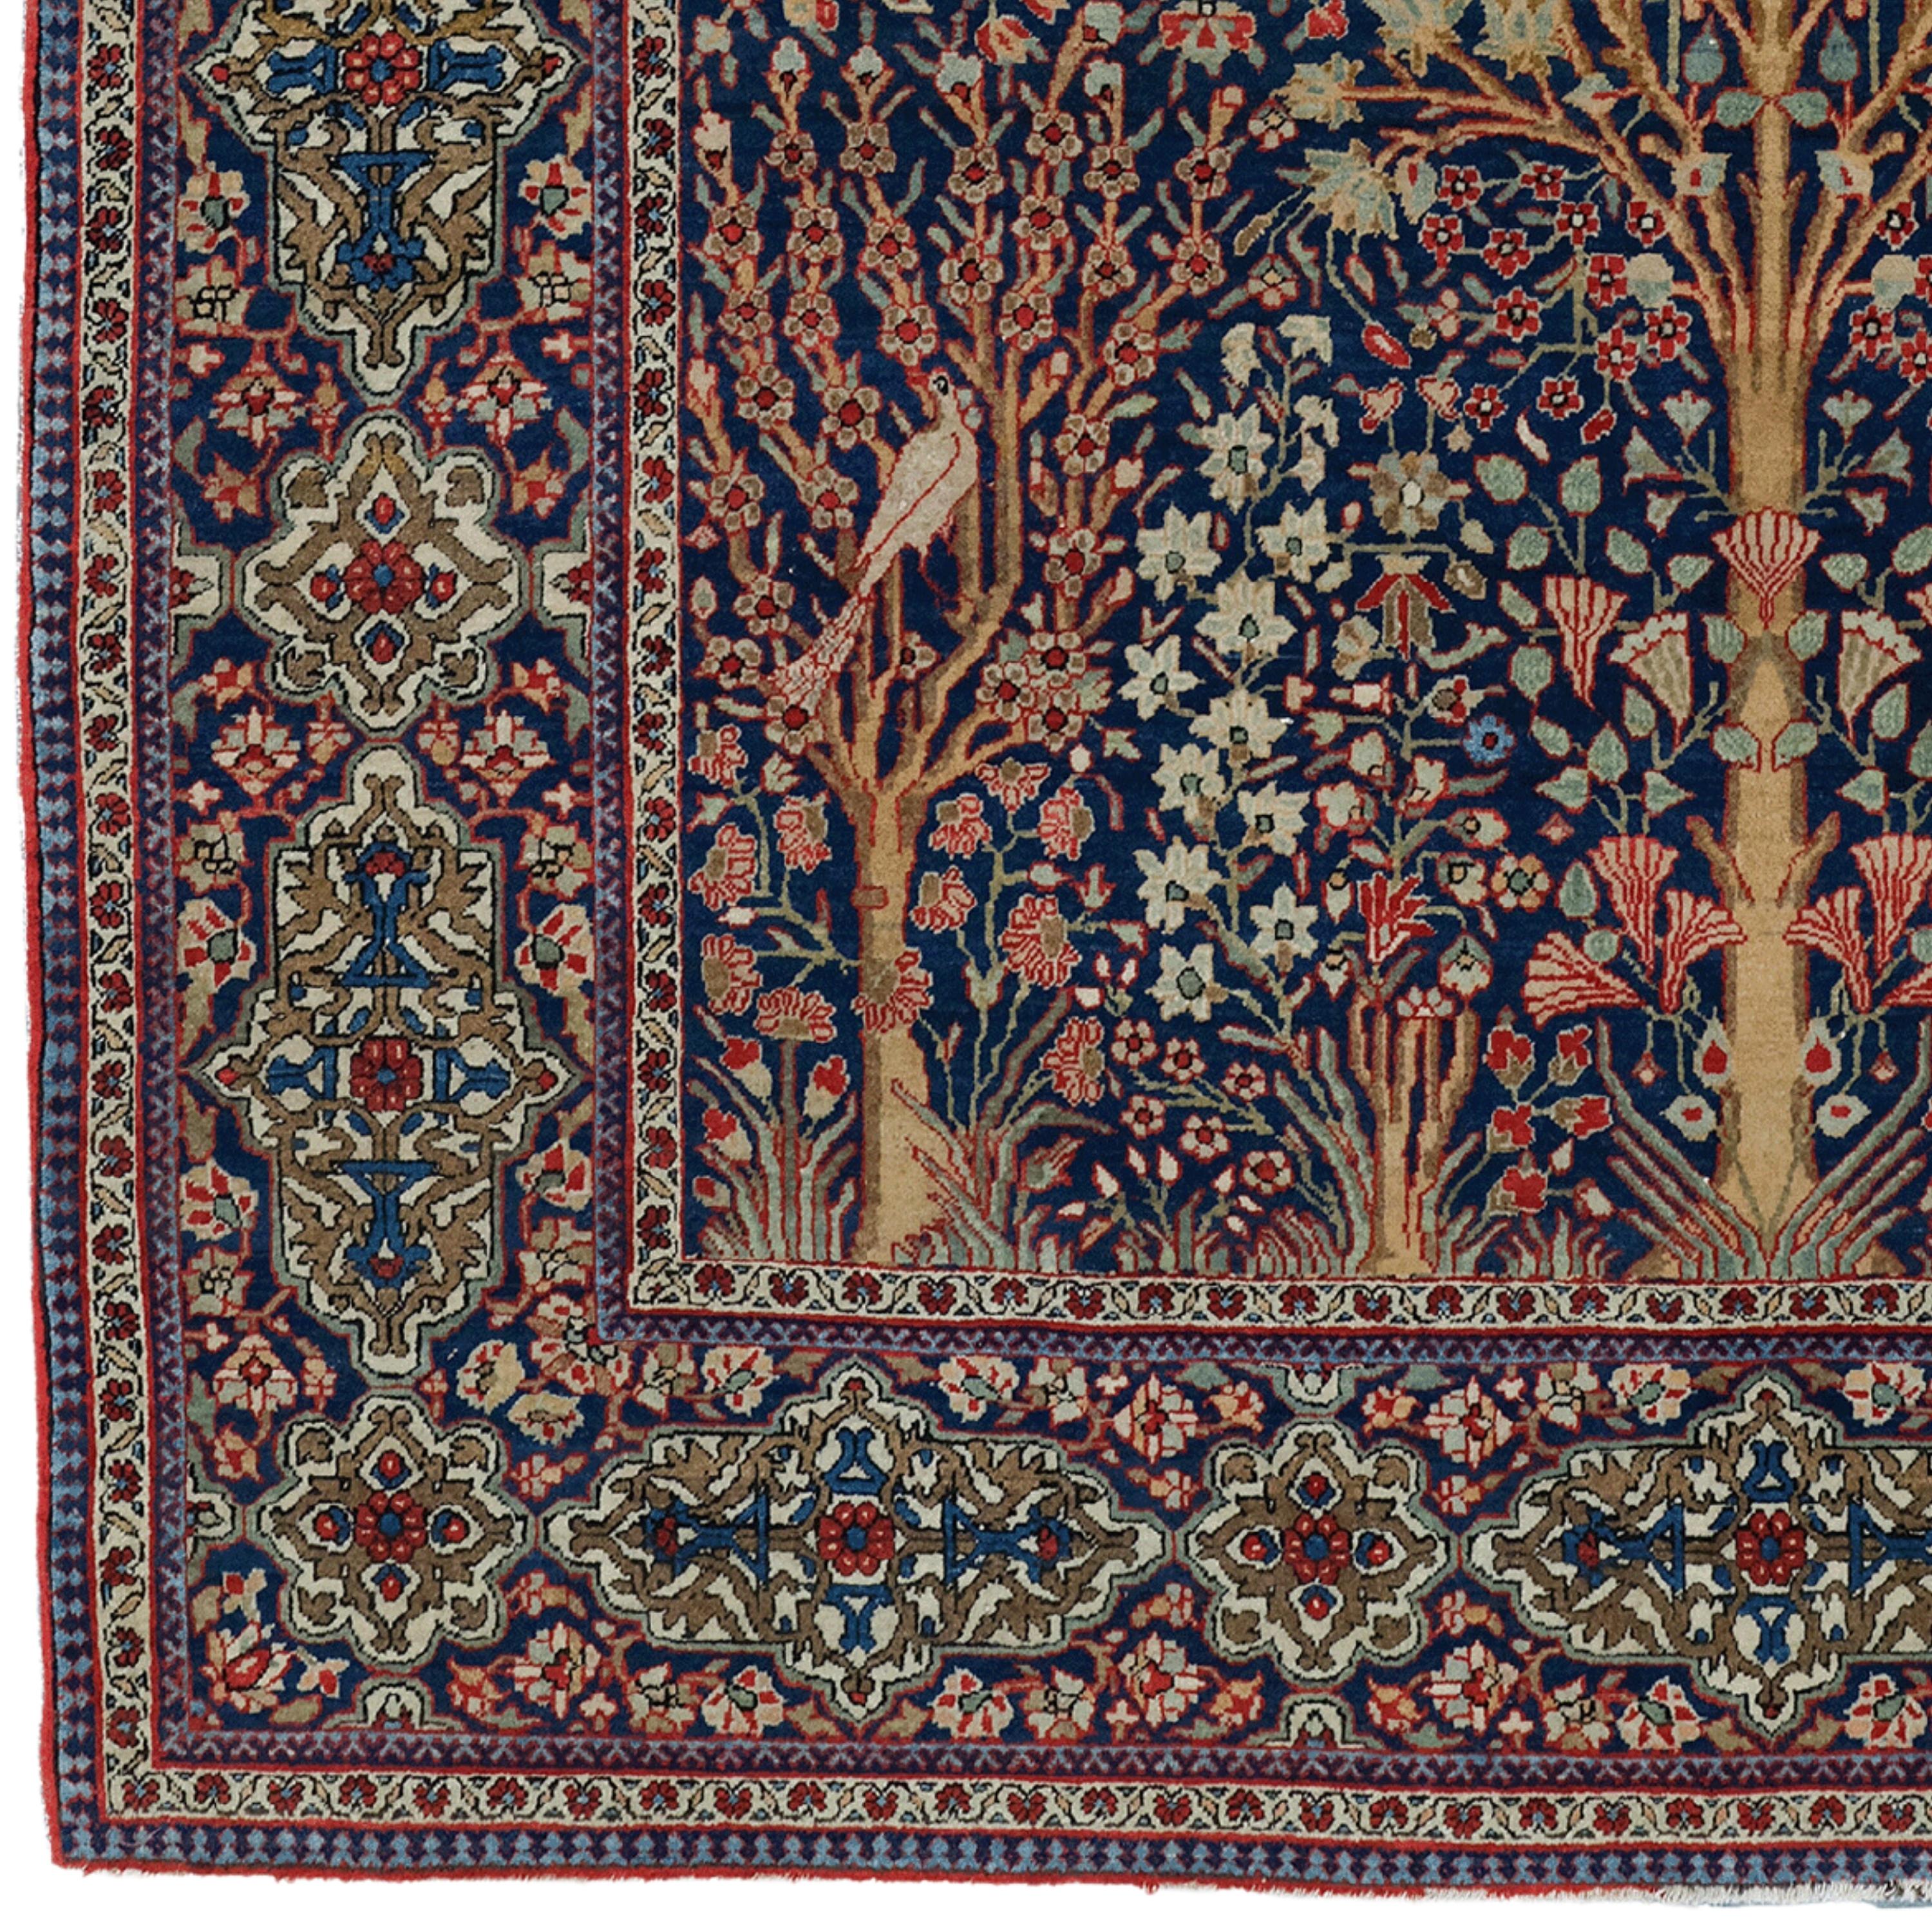 Sophisticated Elegance: 20th Century Vintage Keshan Prayer Rug

If you want to add elegance and style to your home, this vintage rug is for you. This carpet is a keshan carpet dating back to the late 20th century. Keshan is one of the most famous